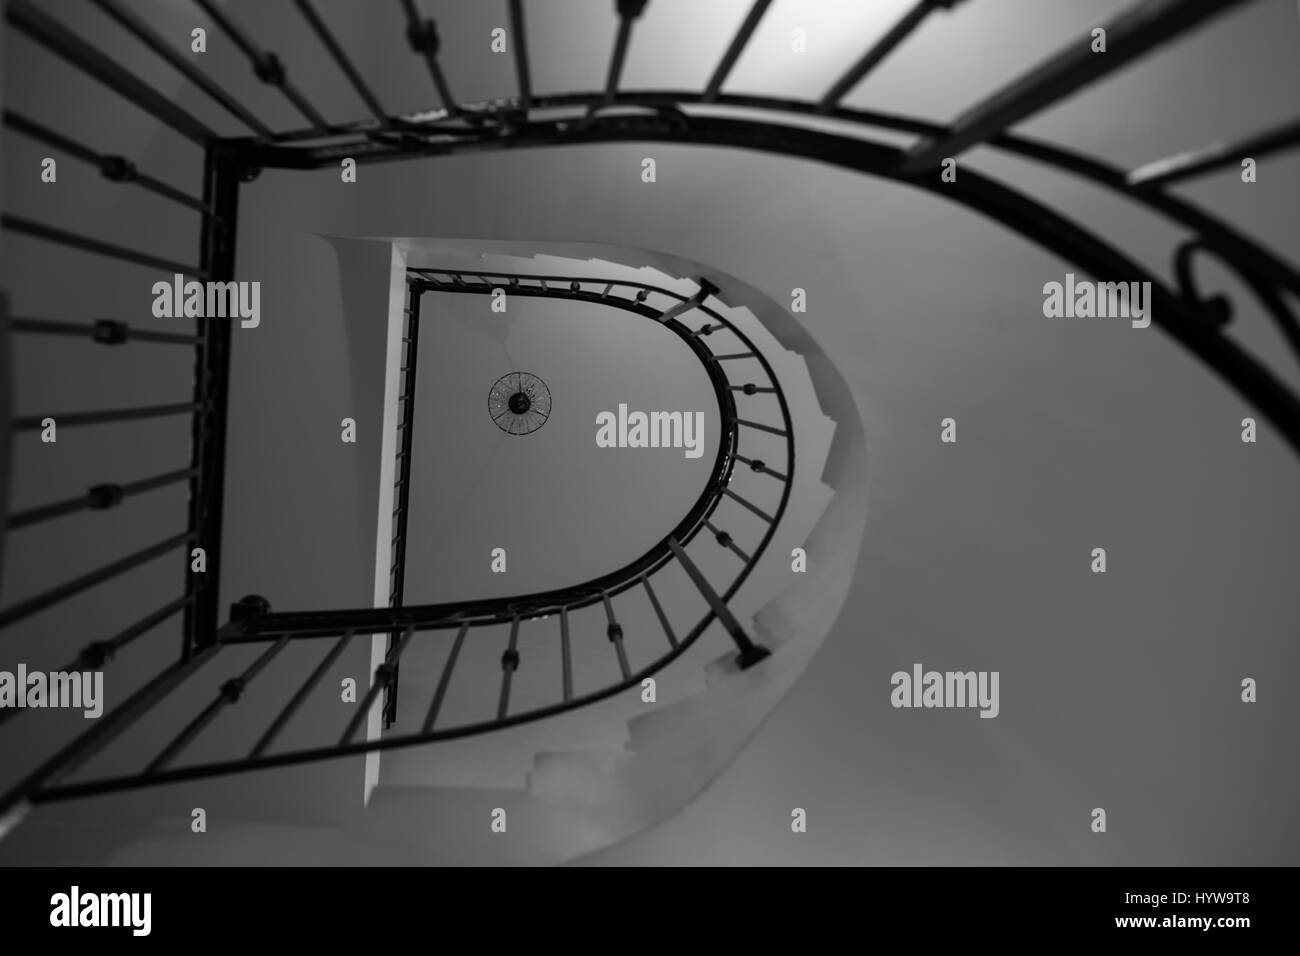 Staircase in black and white Stock Photo